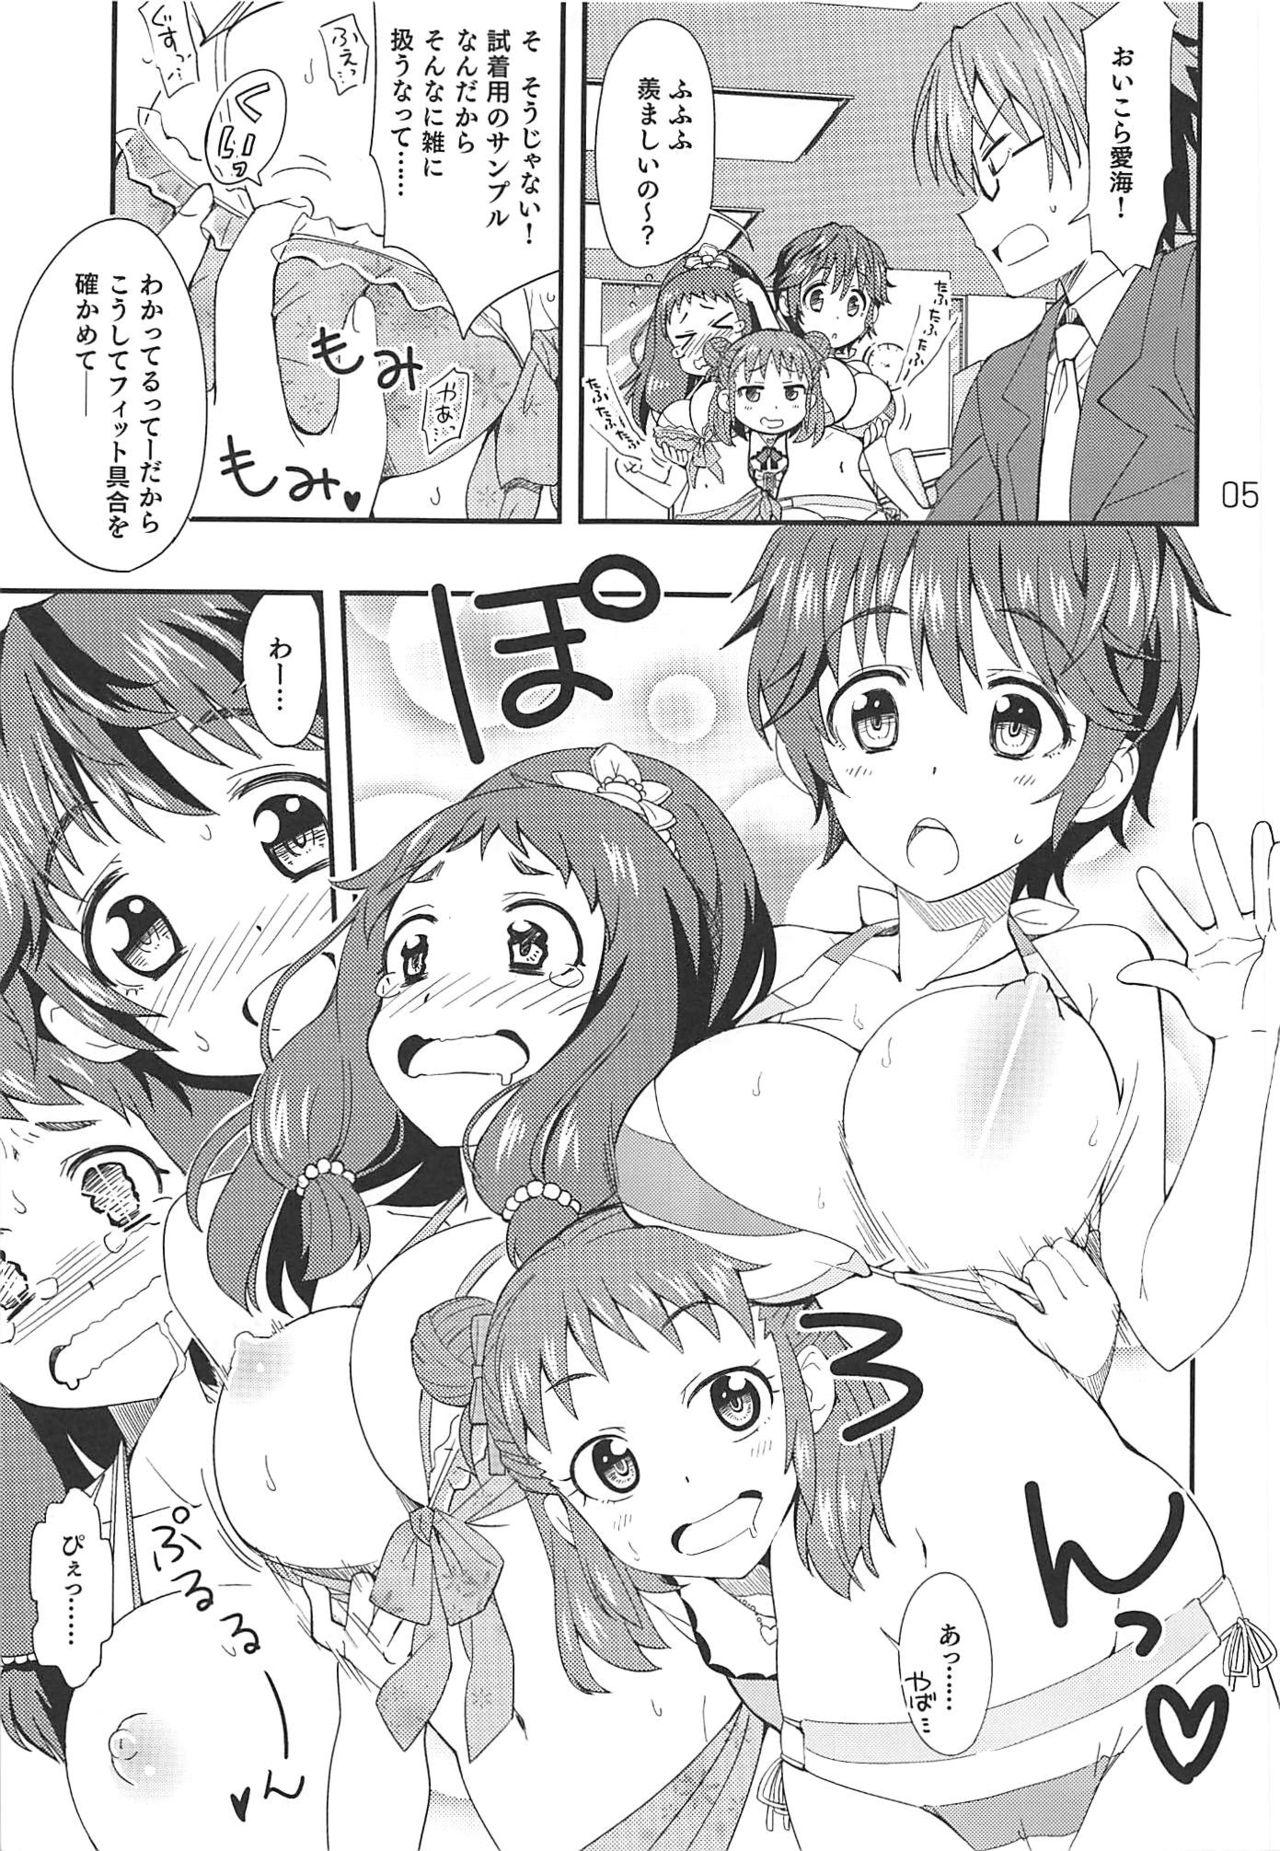 Freak Wotometicm@ster - The idolmaster Por - Page 4